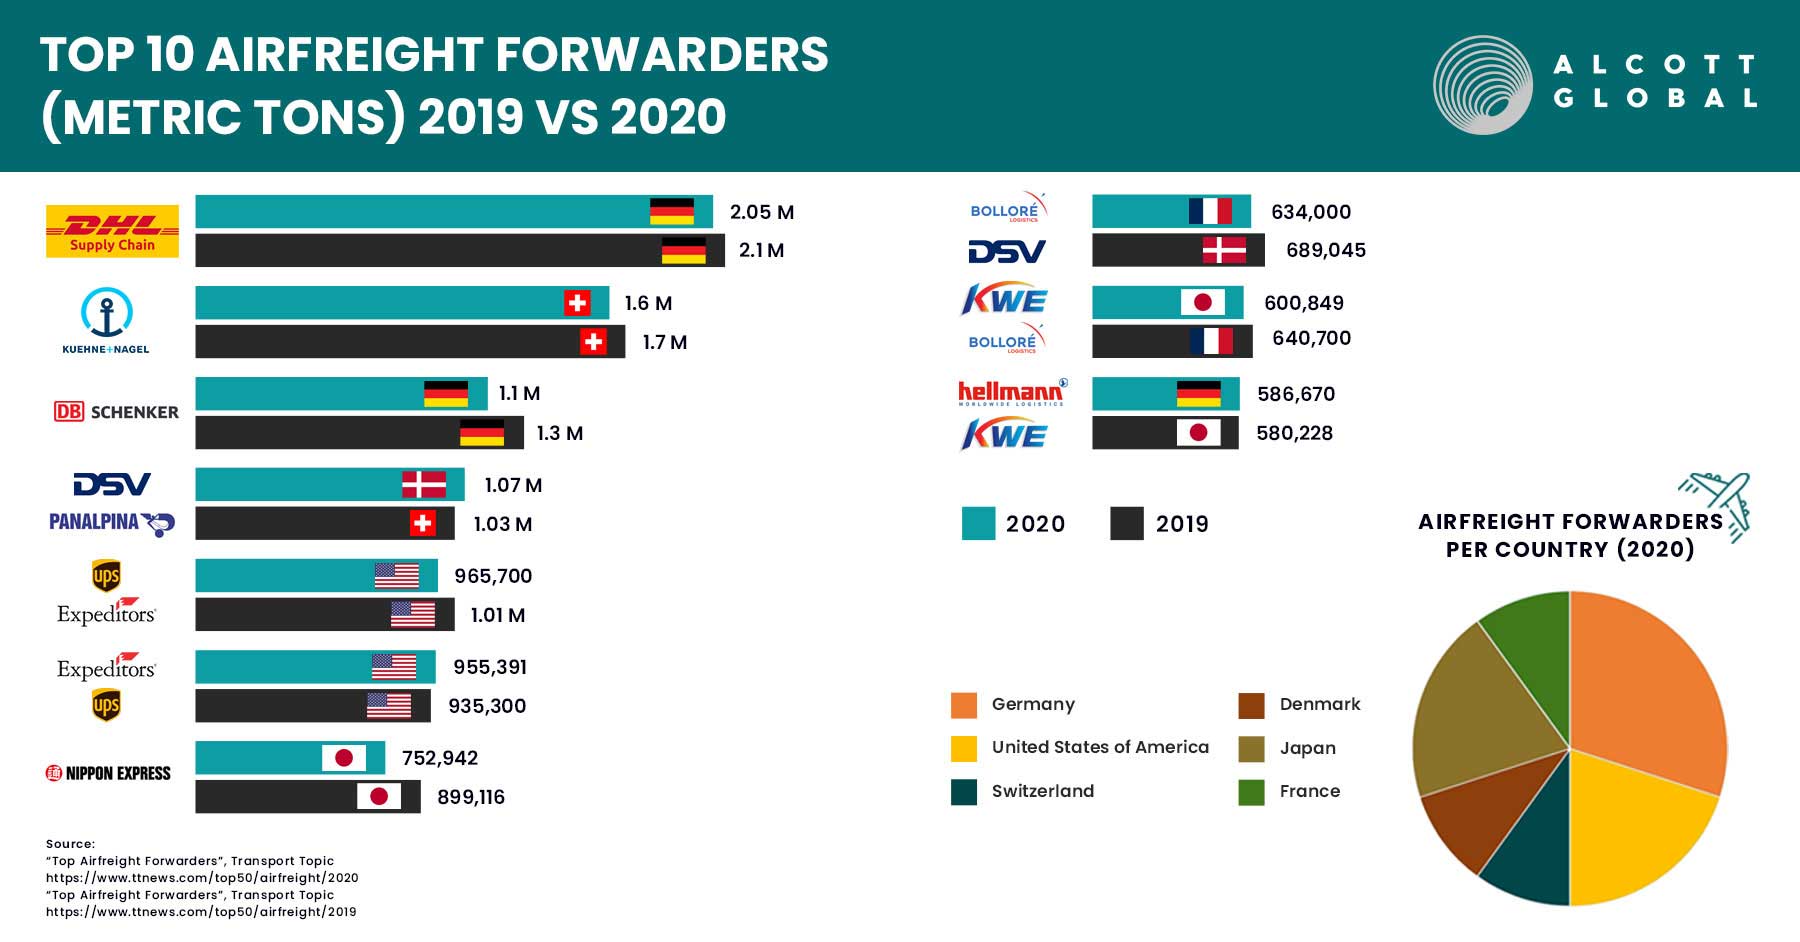 Top 10 Airfreight 2020 vs. 2019 Alcott Global